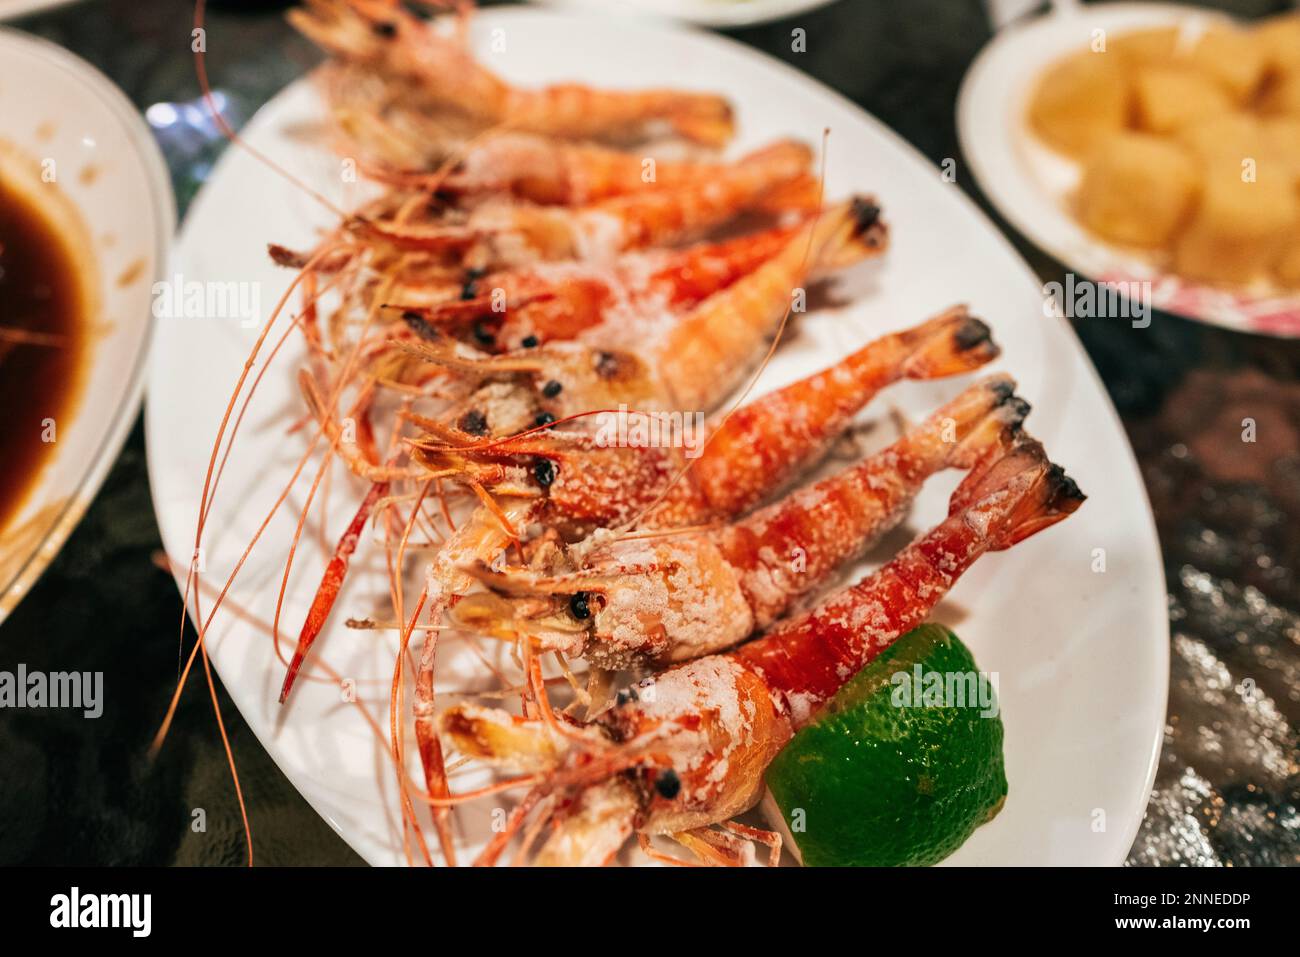 Spicy Taiwanese Pepper Shrimp. It was cooked with Sesame oil. Stock Photo